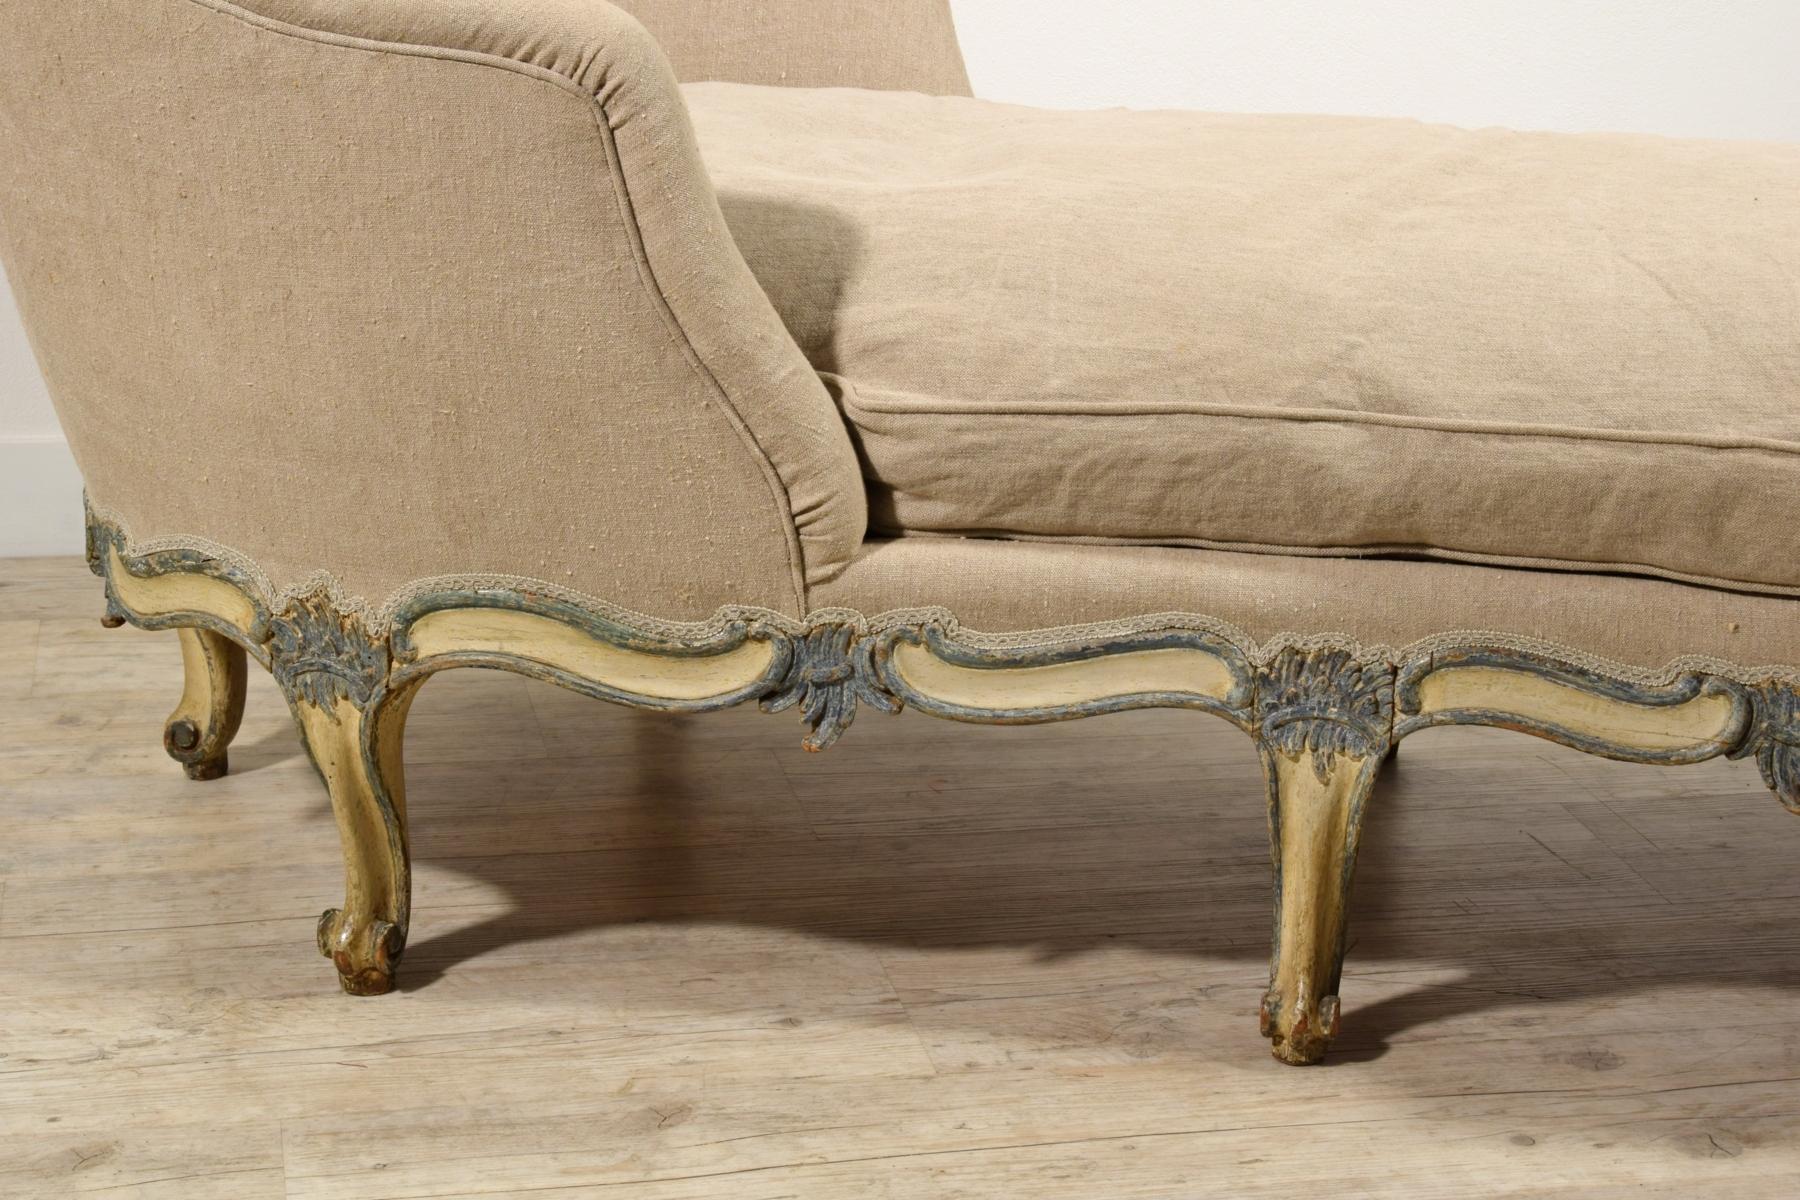 18th Century, Italian Baroque Carved and Lacquered Wood Chaise Longue  1